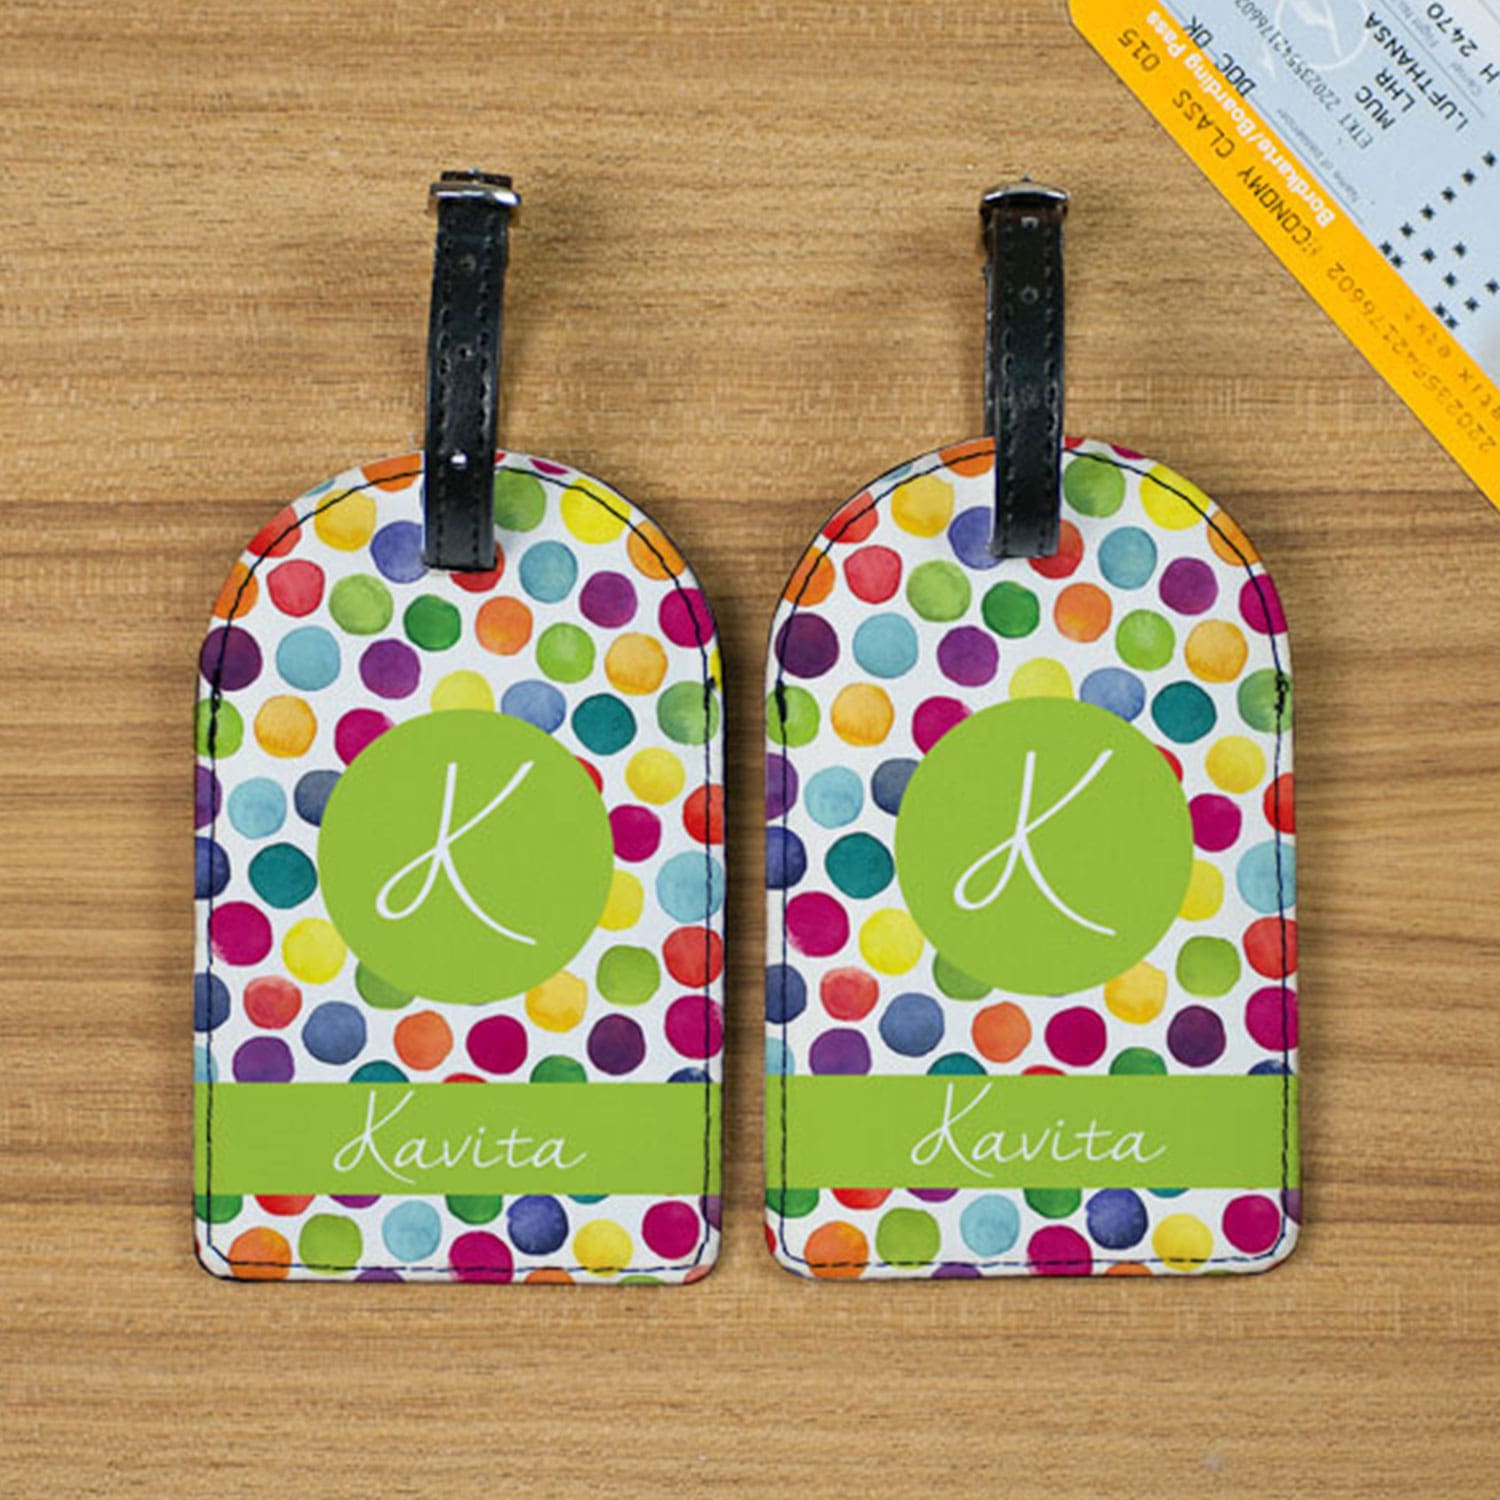 Travel Destination Personalized Luggage Tags